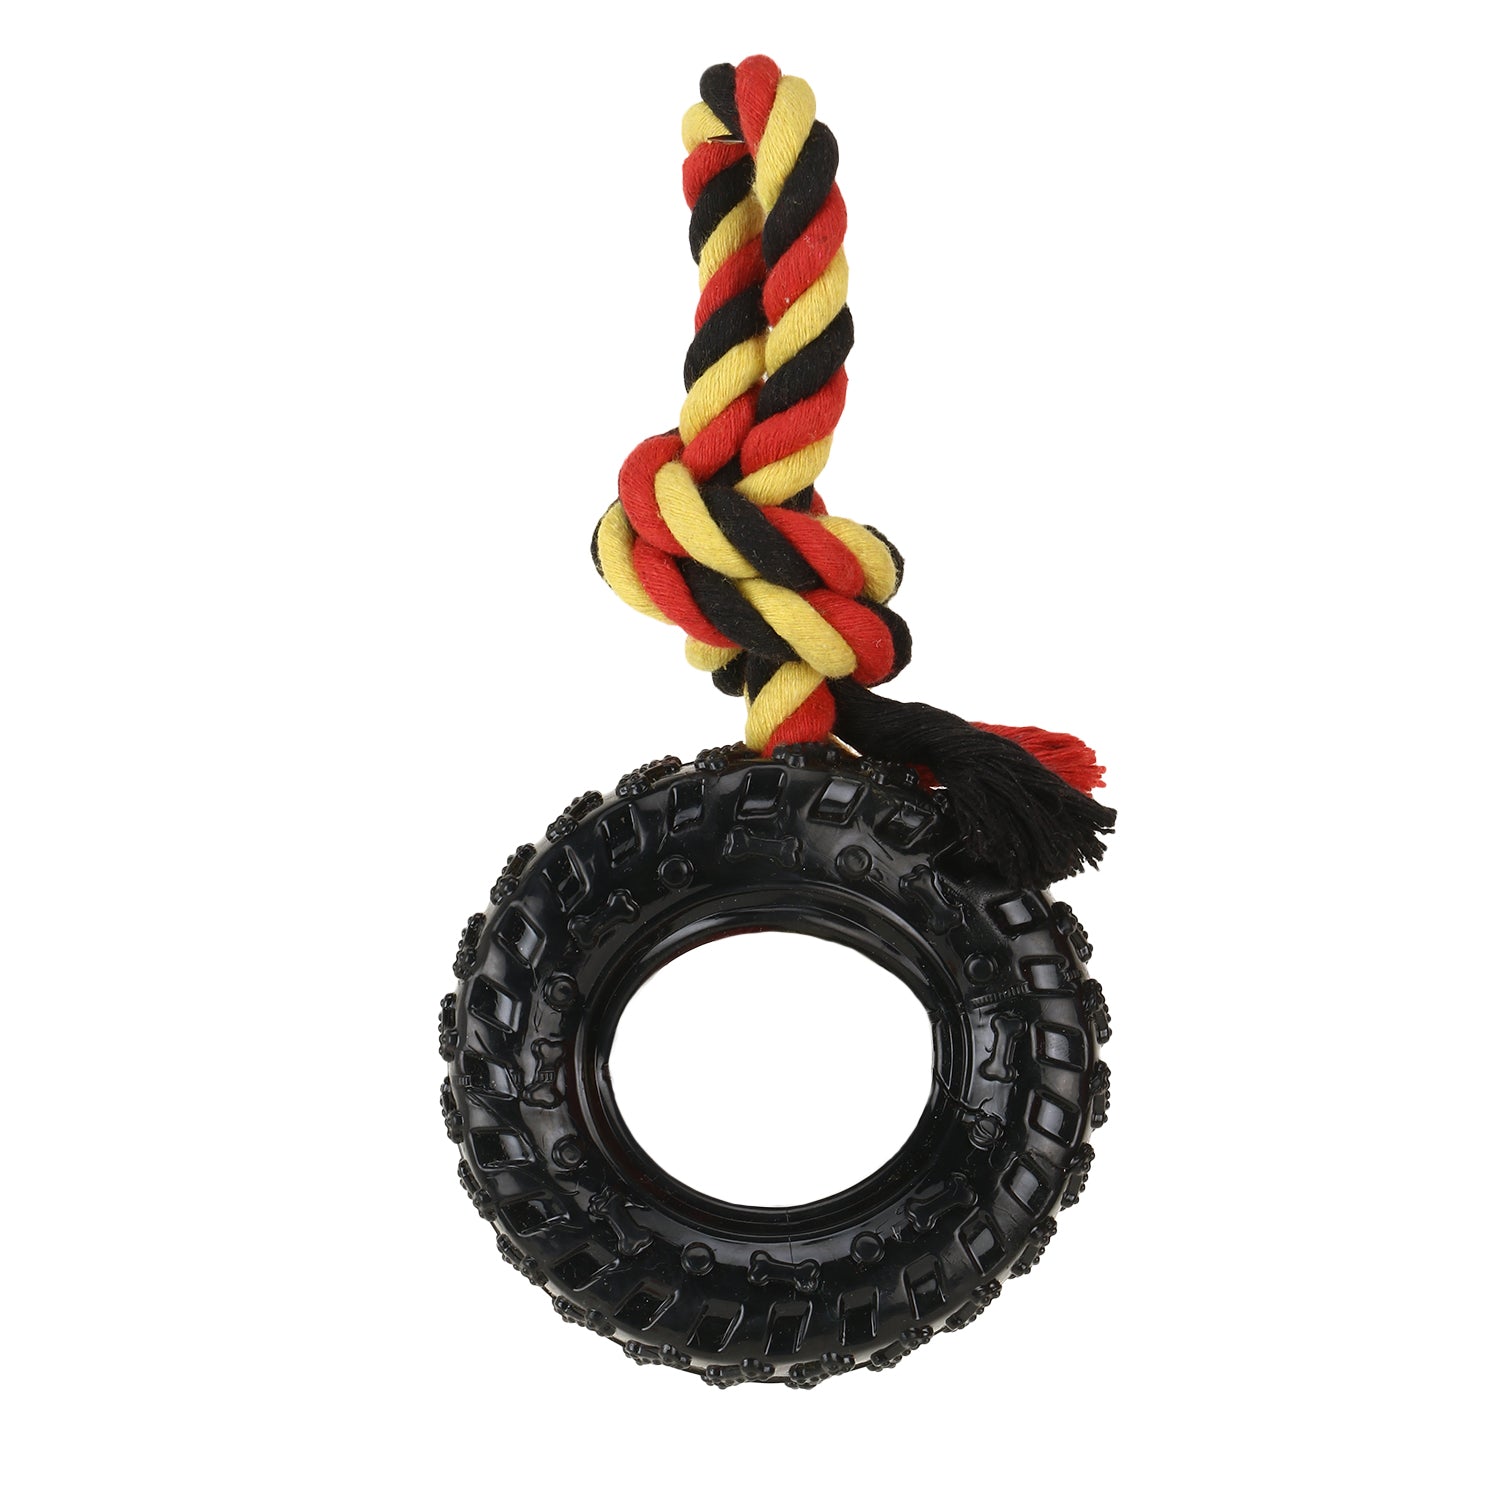 Basil Rubber Tyre with Rope for Tugging Hollow Centre for treat stuffing